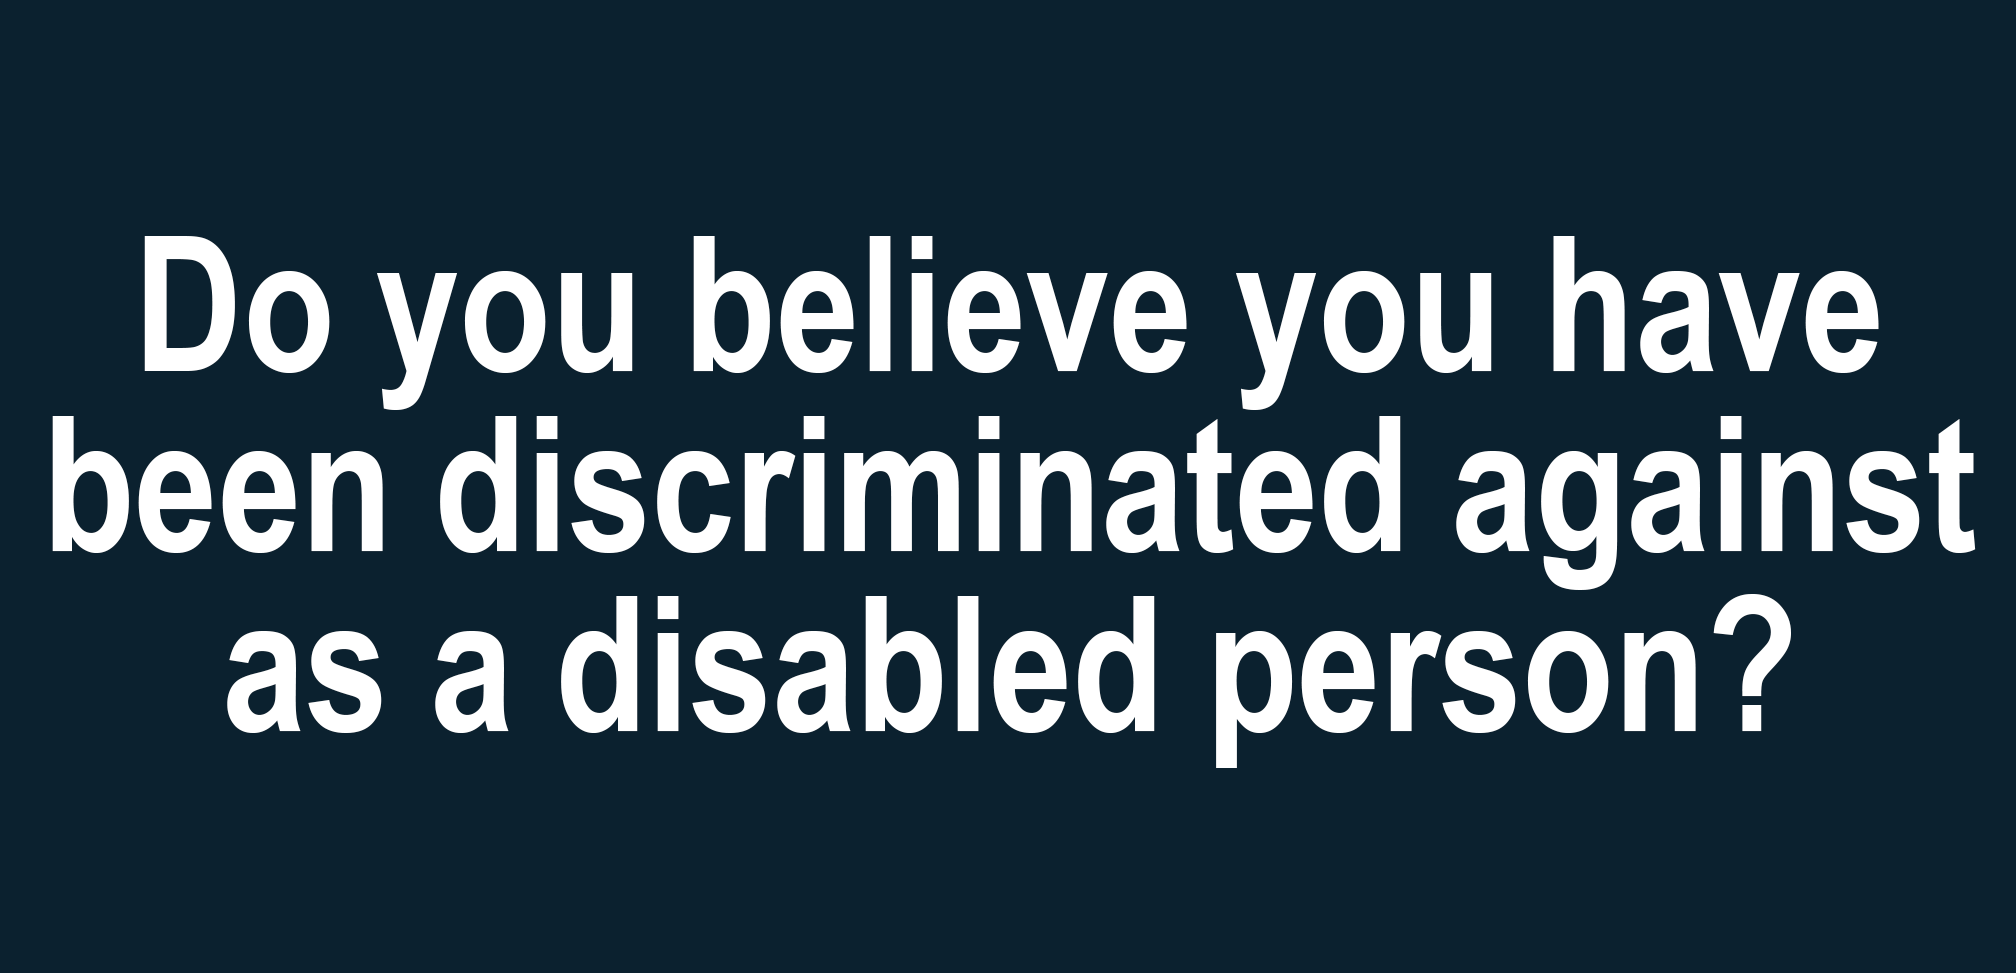 Do you believe you have been discriminated against as a disabled person?